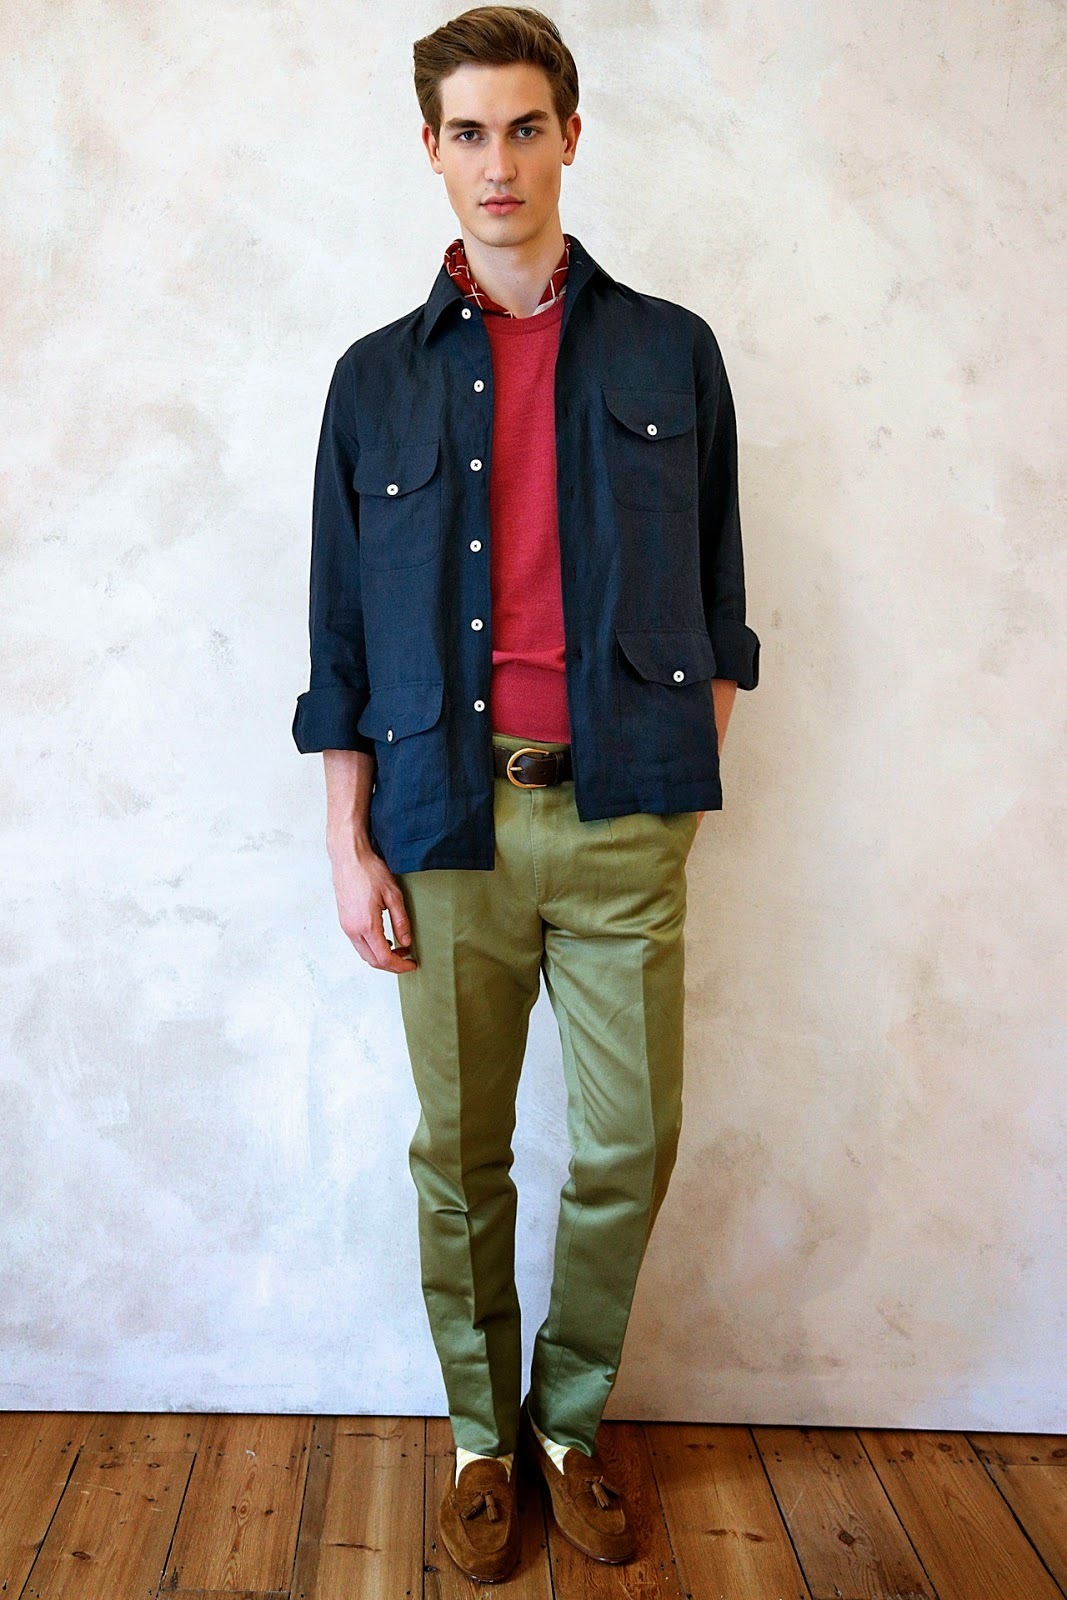 Green & Olive Pants | Well dressed men, Mens fashion, Mens outfits